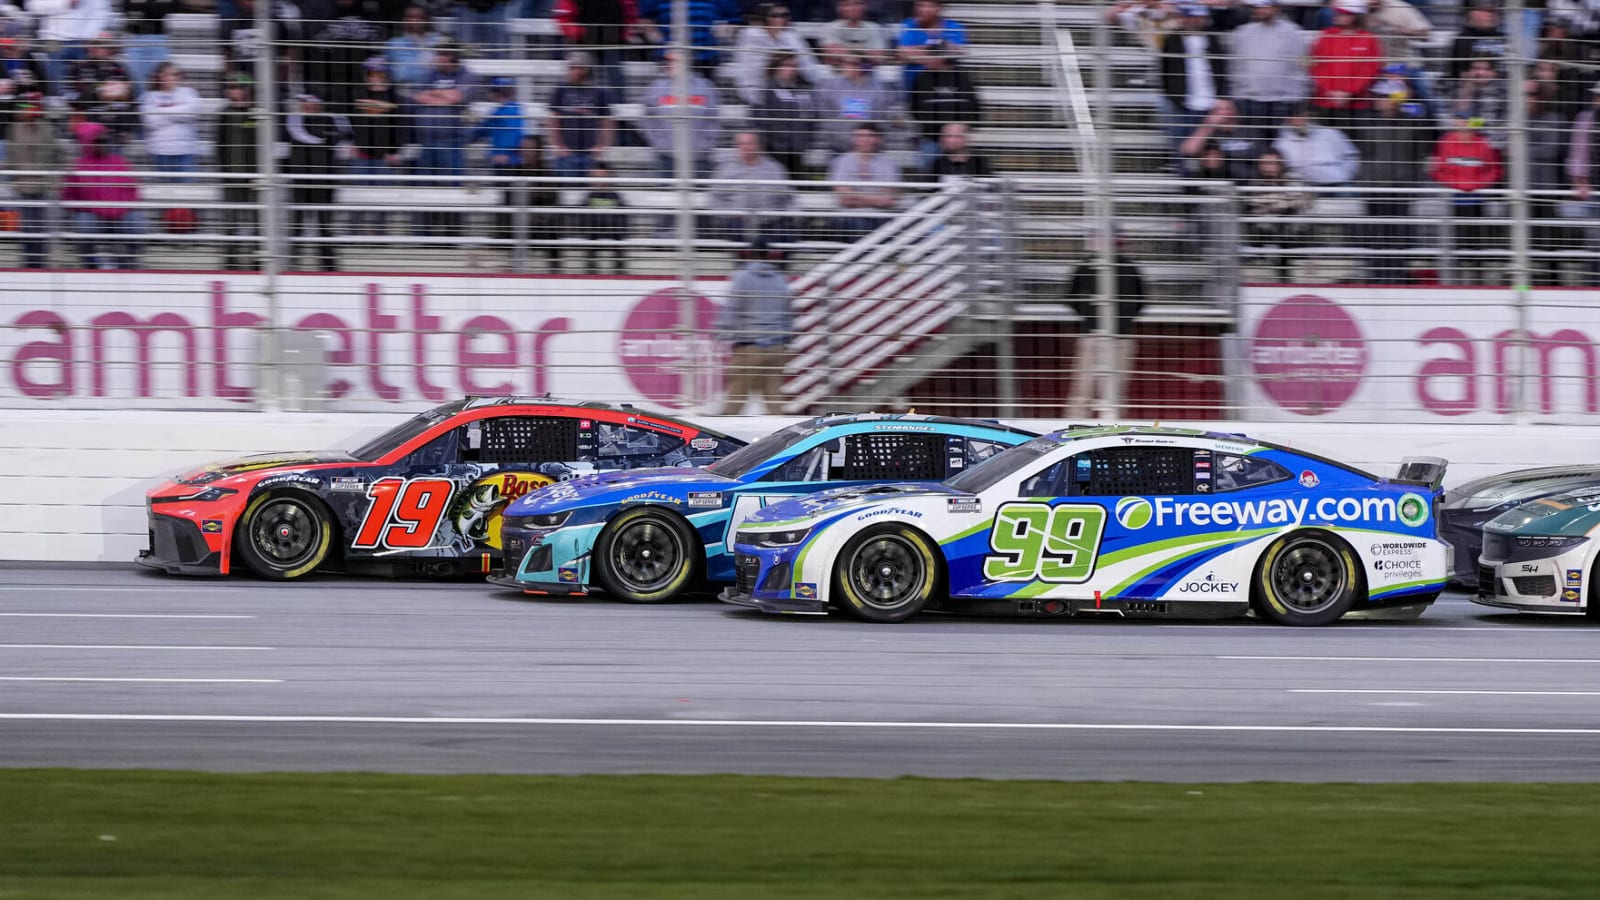 What we learned after one of the greatest finishes in NASCAR history